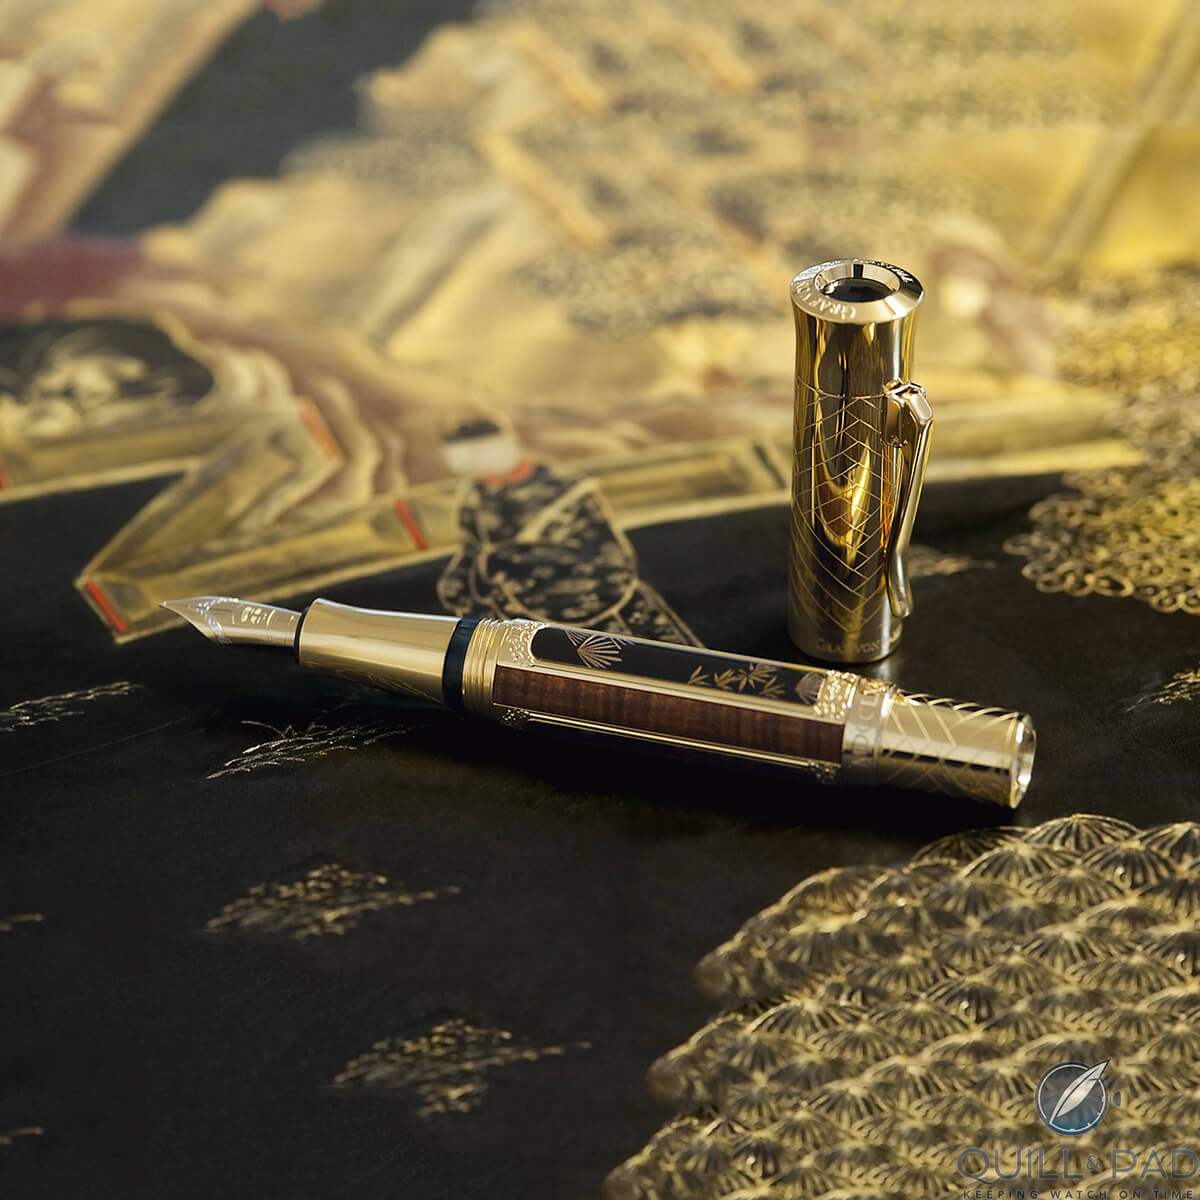 Faber-Castell Pen of the Year 2016 gold fountain pen